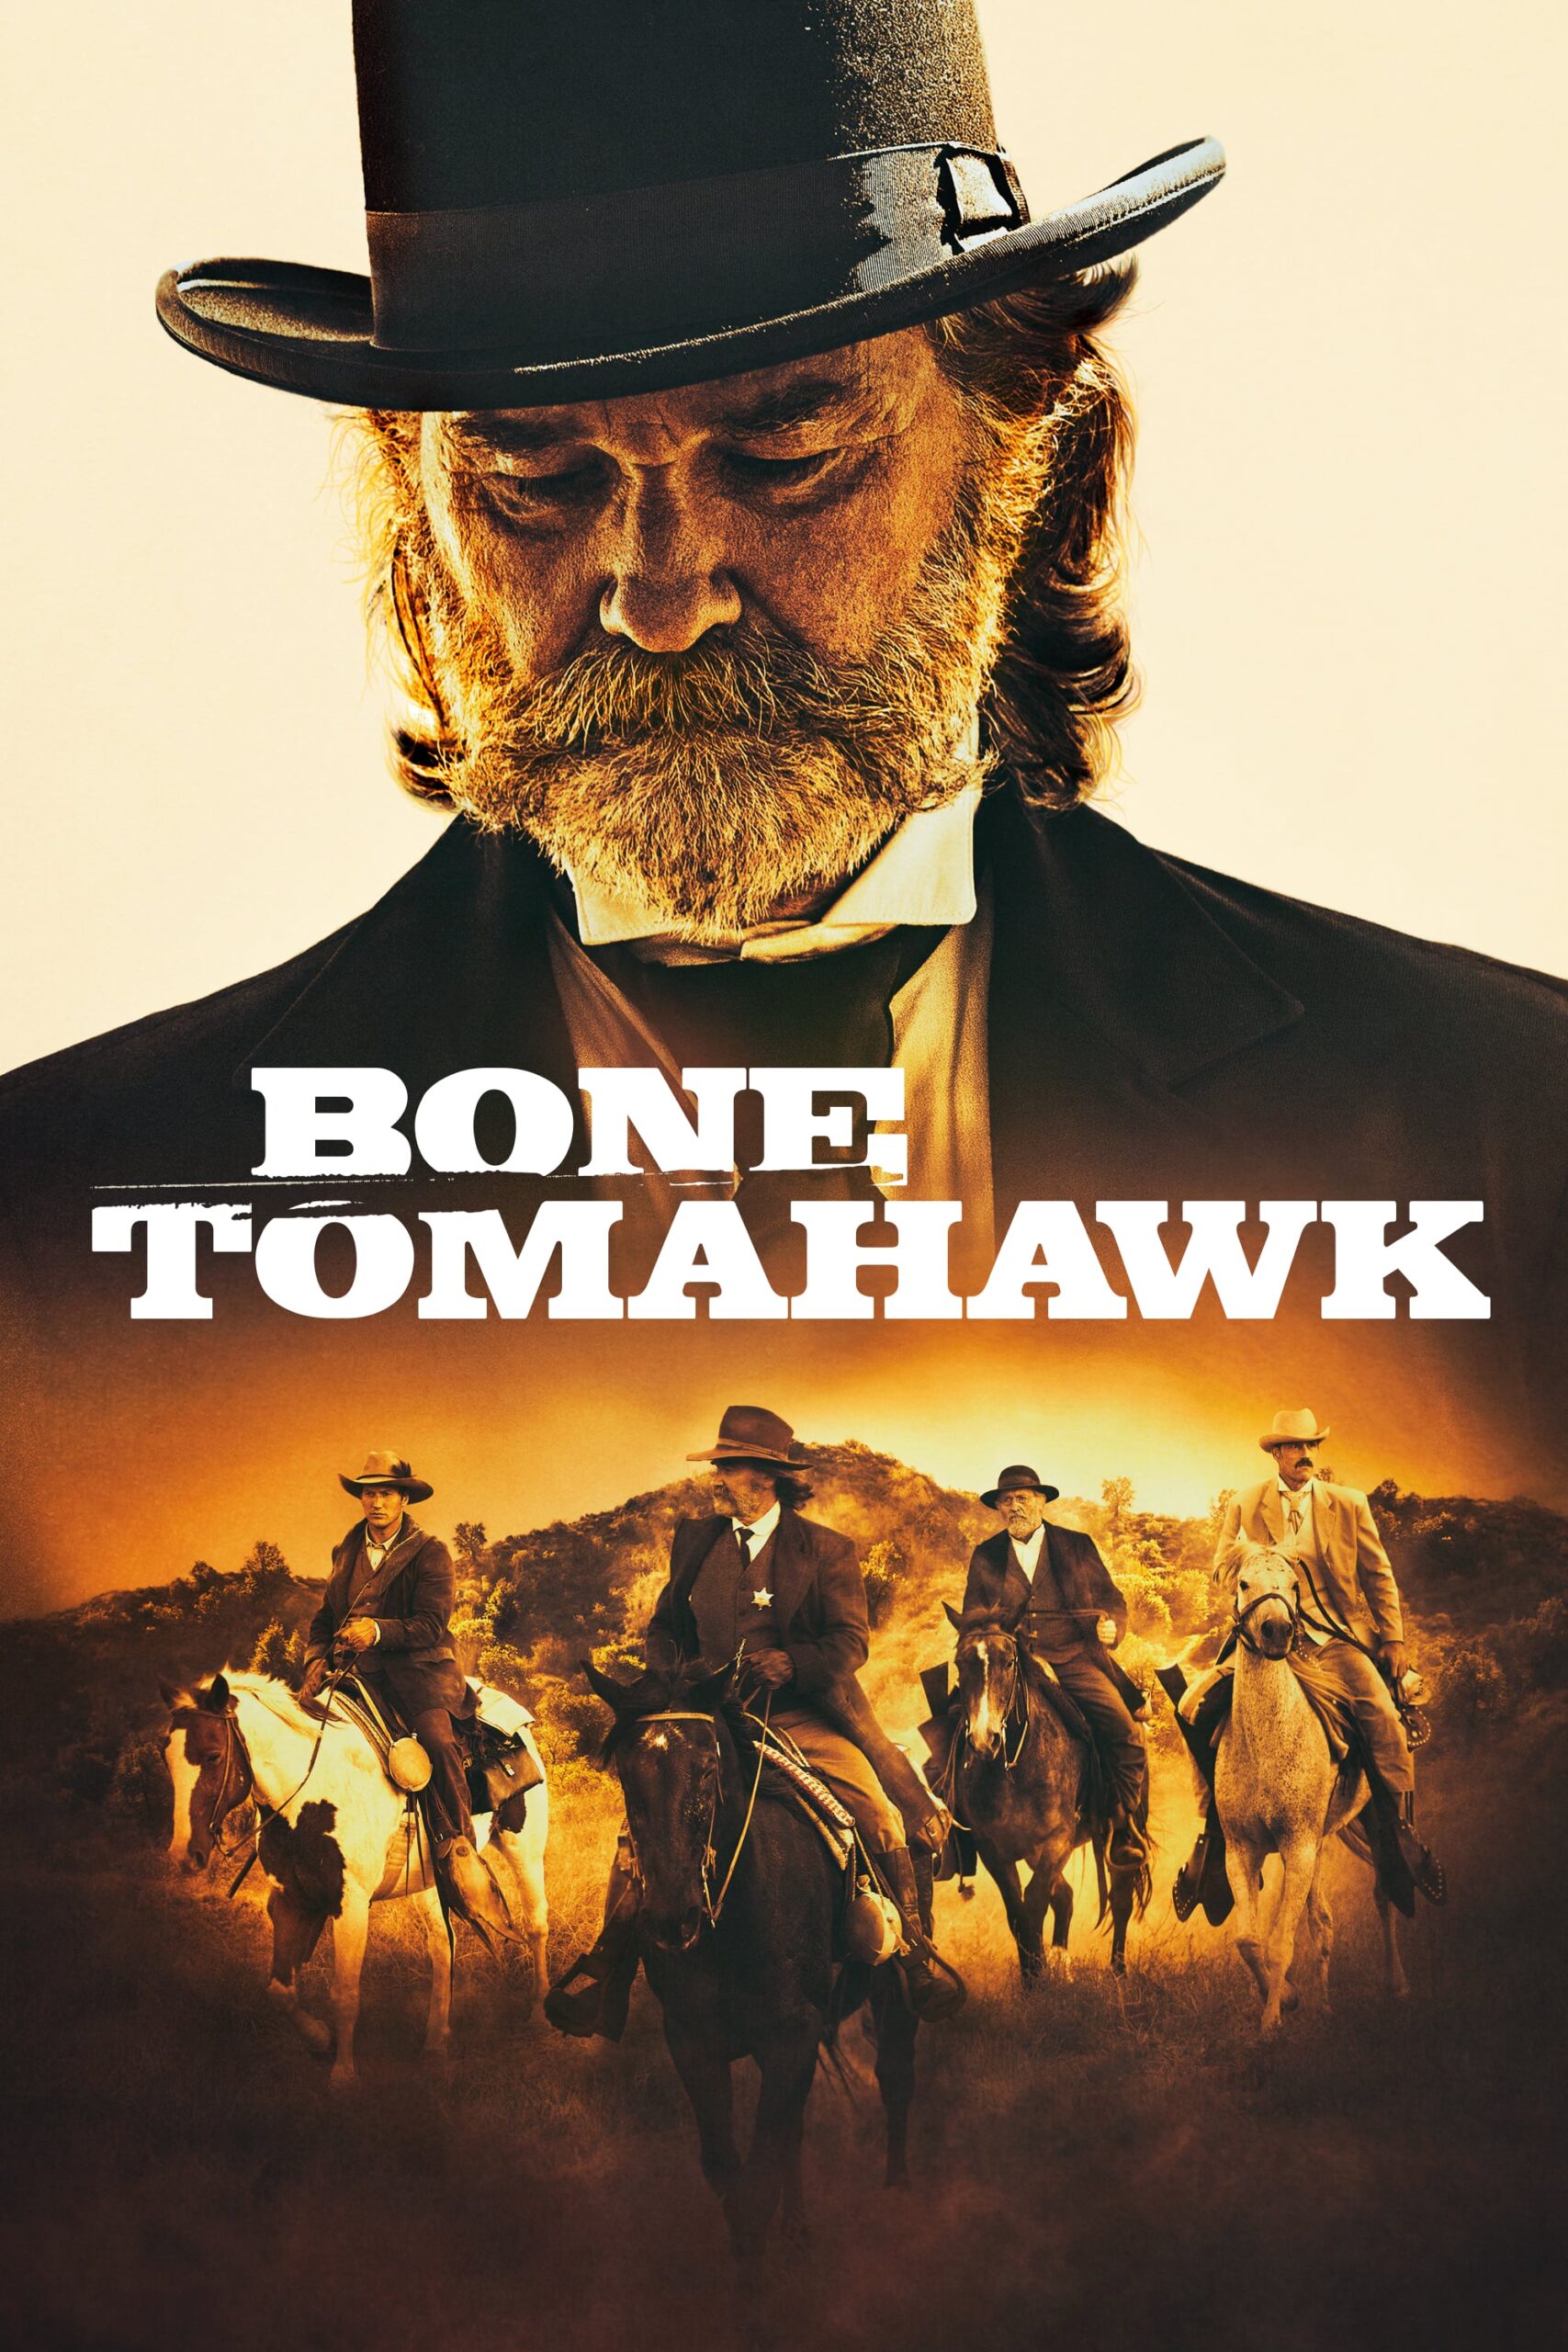 Poster for the movie "Bone Tomahawk"